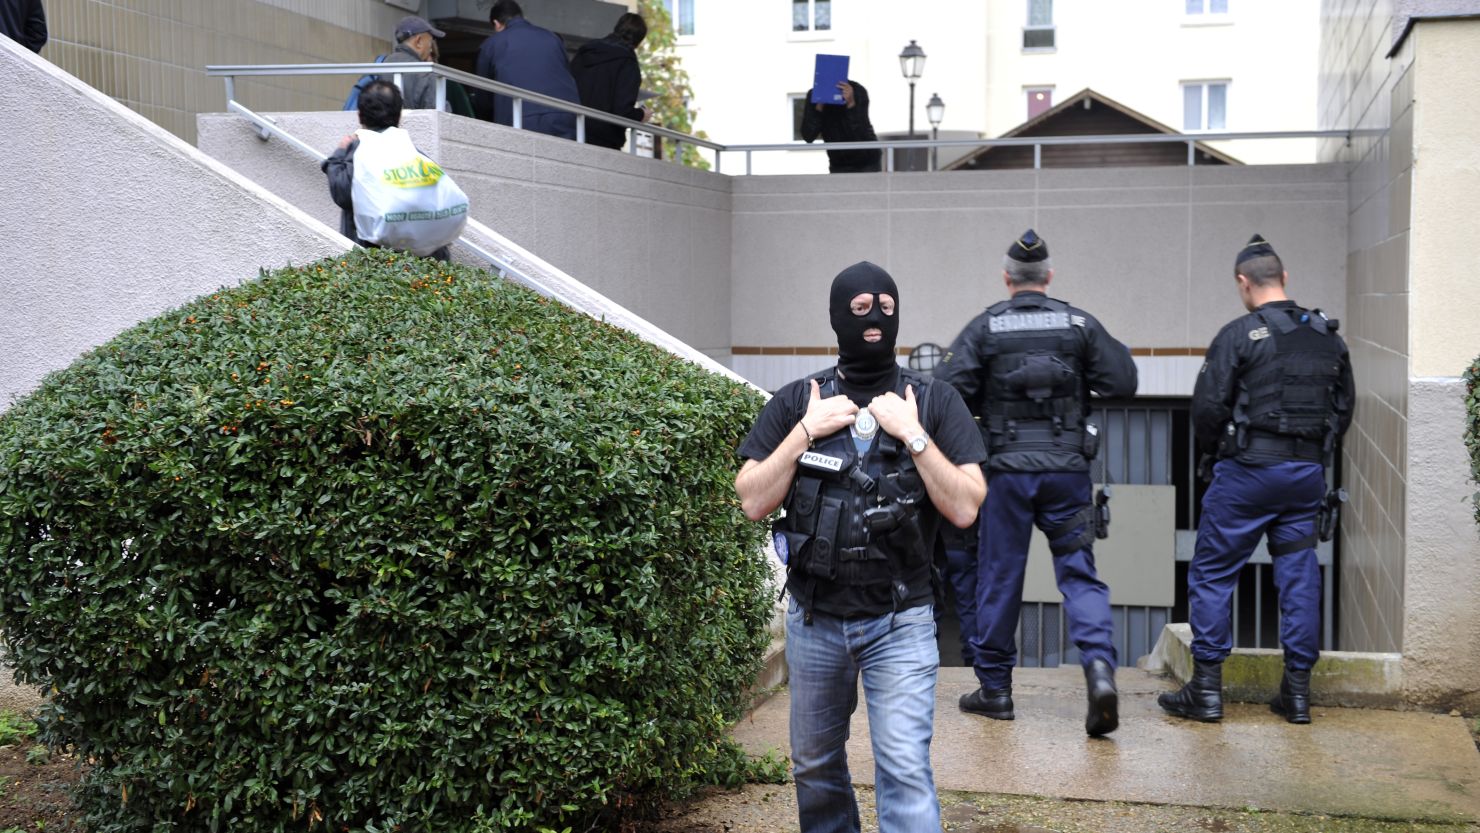 Police investigate outside lock-up garages possibly used by terror suspects in Torcy, east of Paris on October 10, 2012.